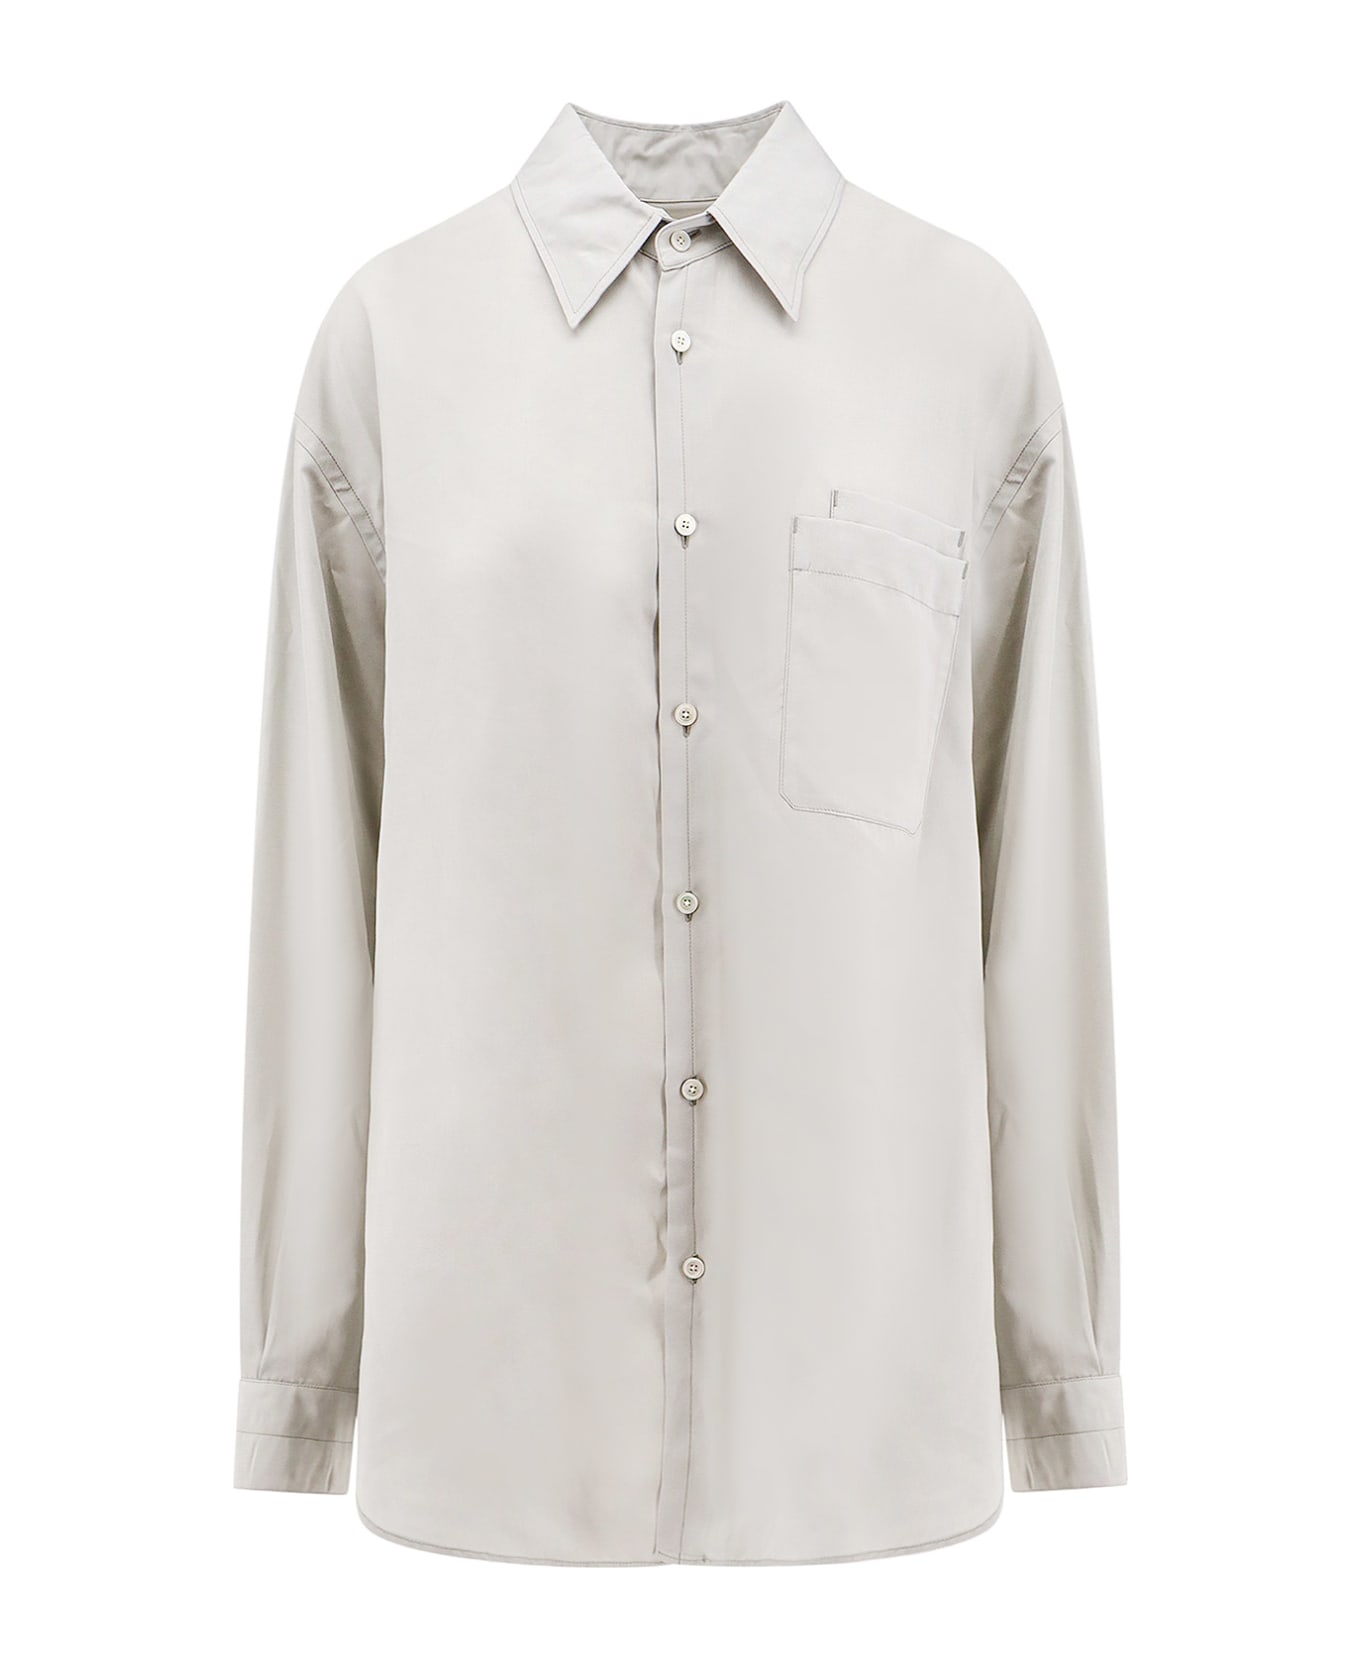 Lemaire Shirt - Grey シャツ